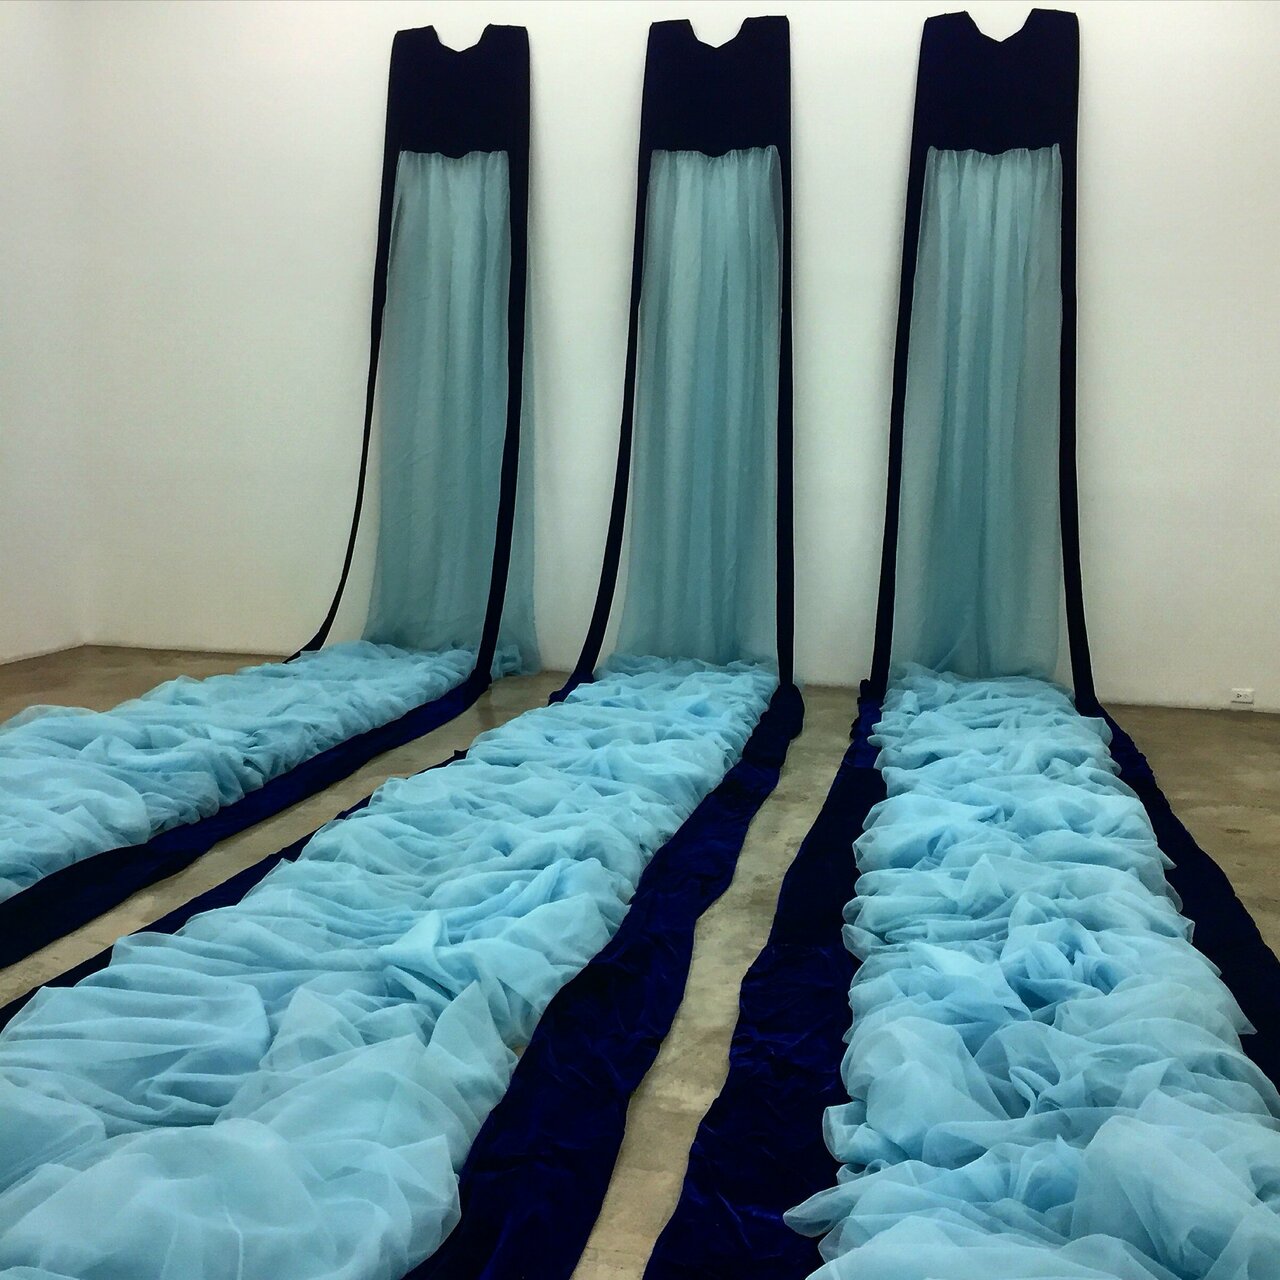 Swimming in "Blue Gowns," 1993 #BeverlySemmes #rubellfamilycollection  #art #miami @wmag https://t.co/3p5bfrJGGp